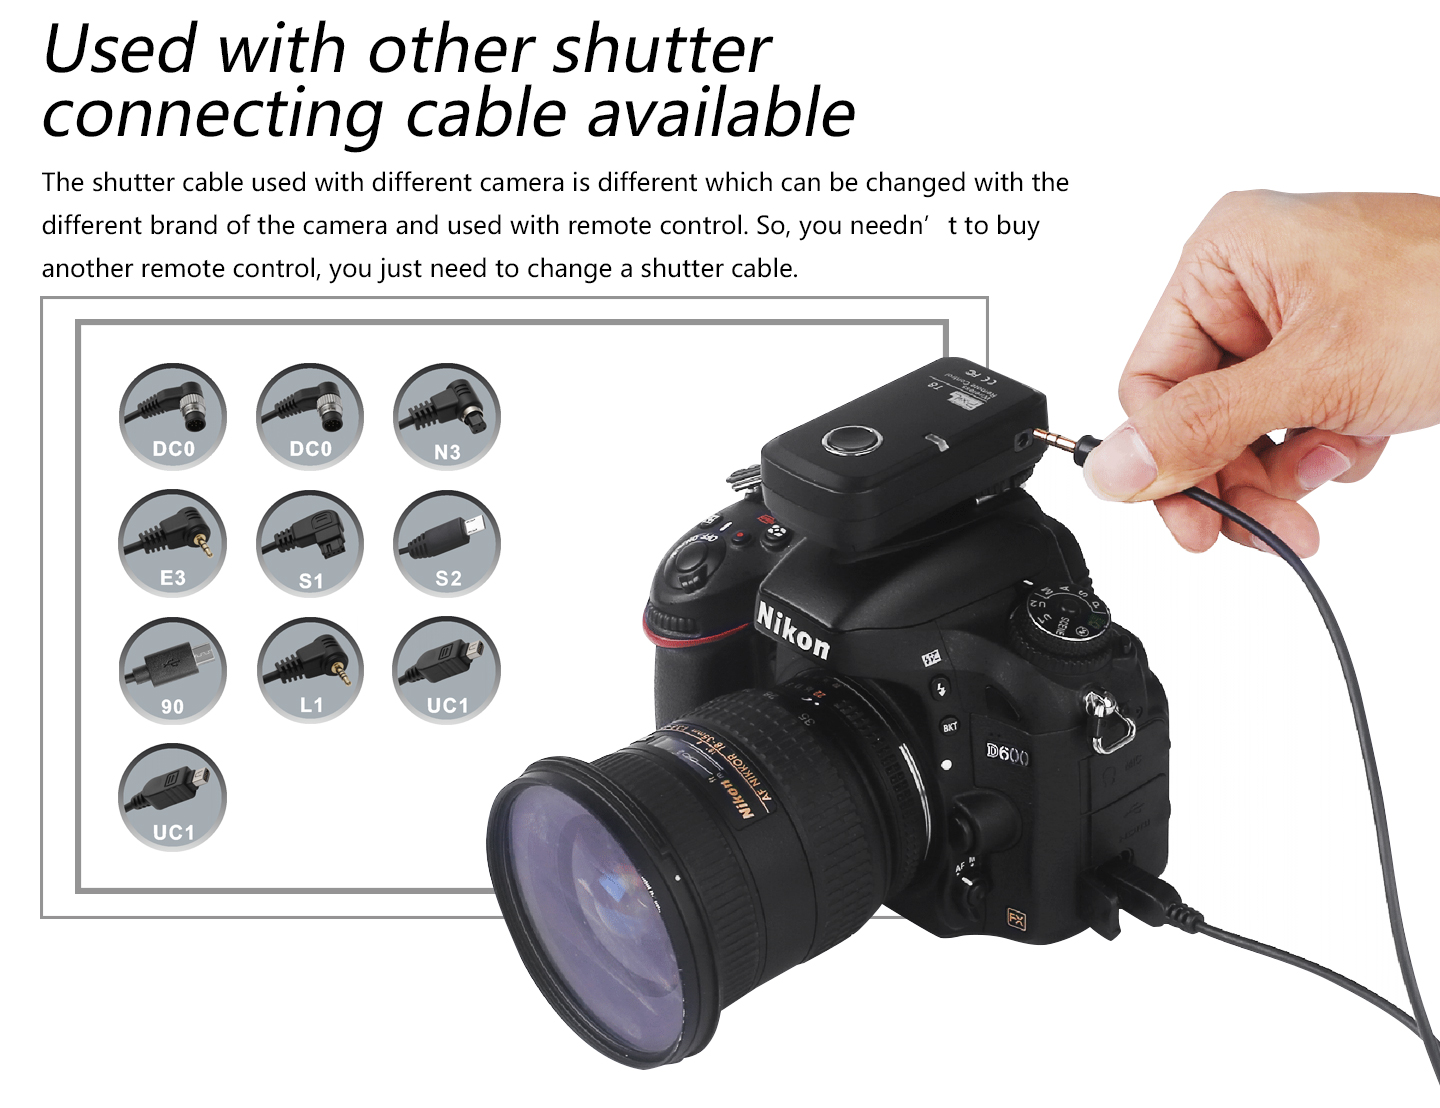 Used with other shutter connecting cable available